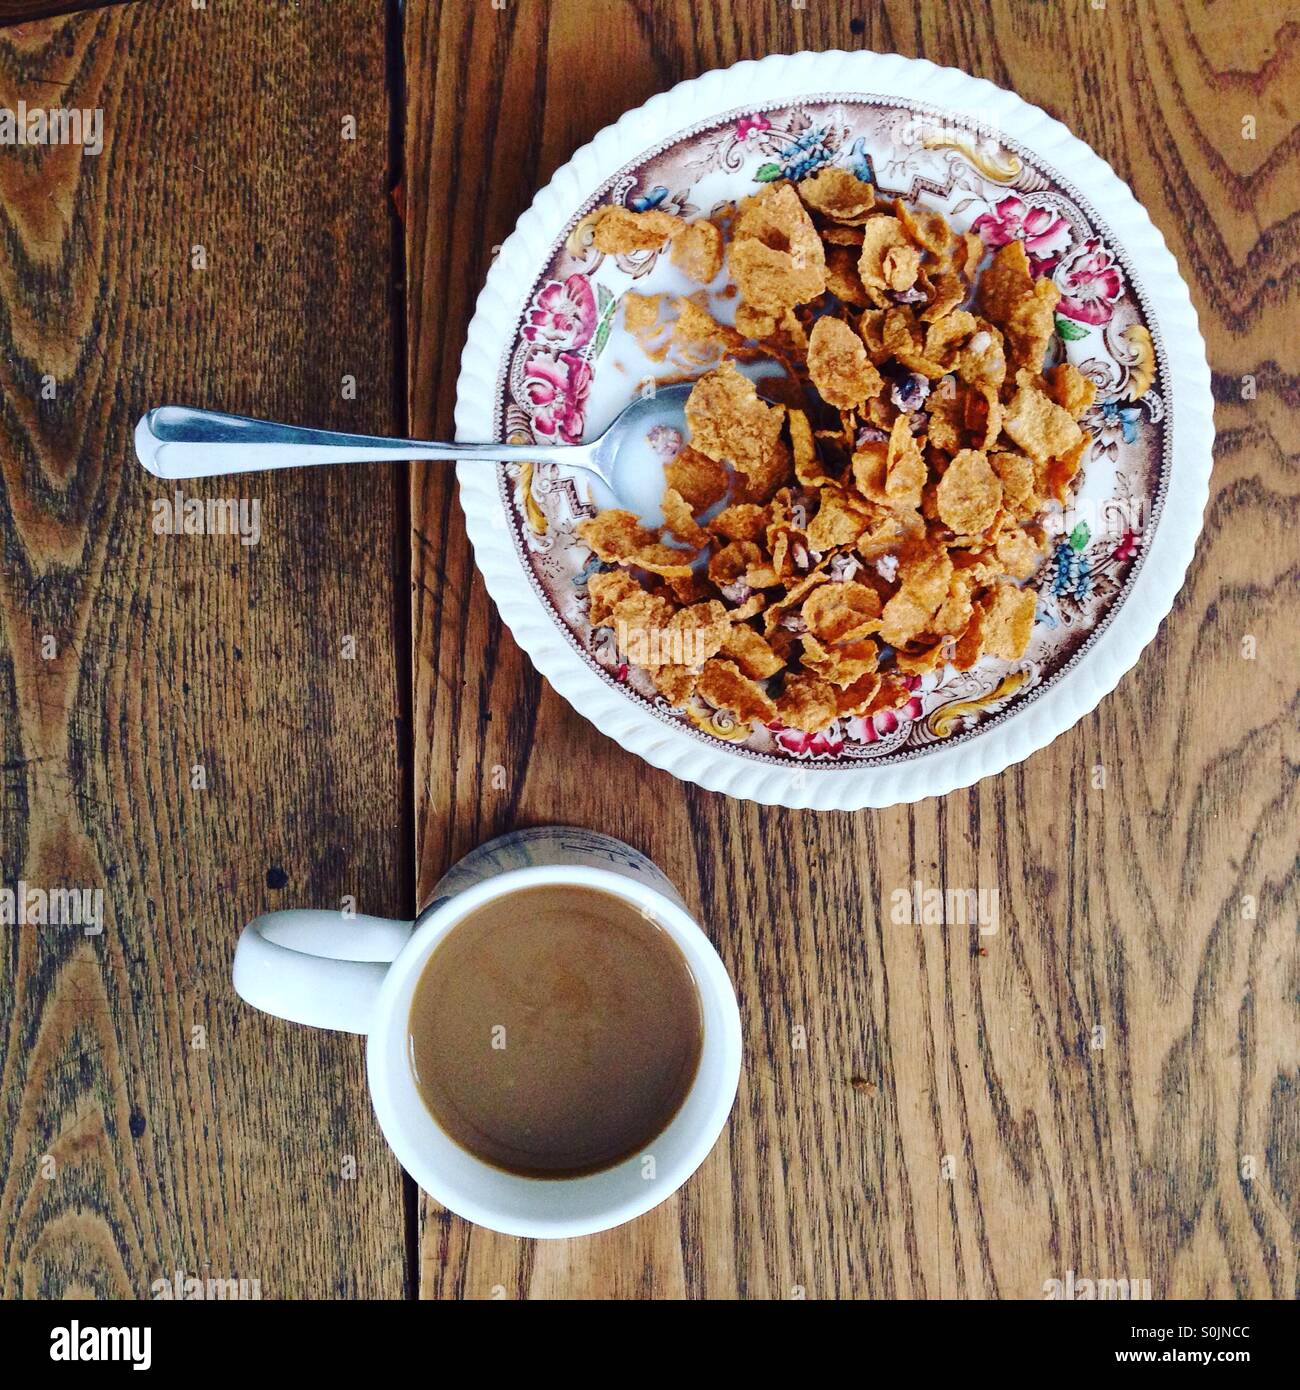 Coffee and cereal breakfast Stock Photo - Alamy